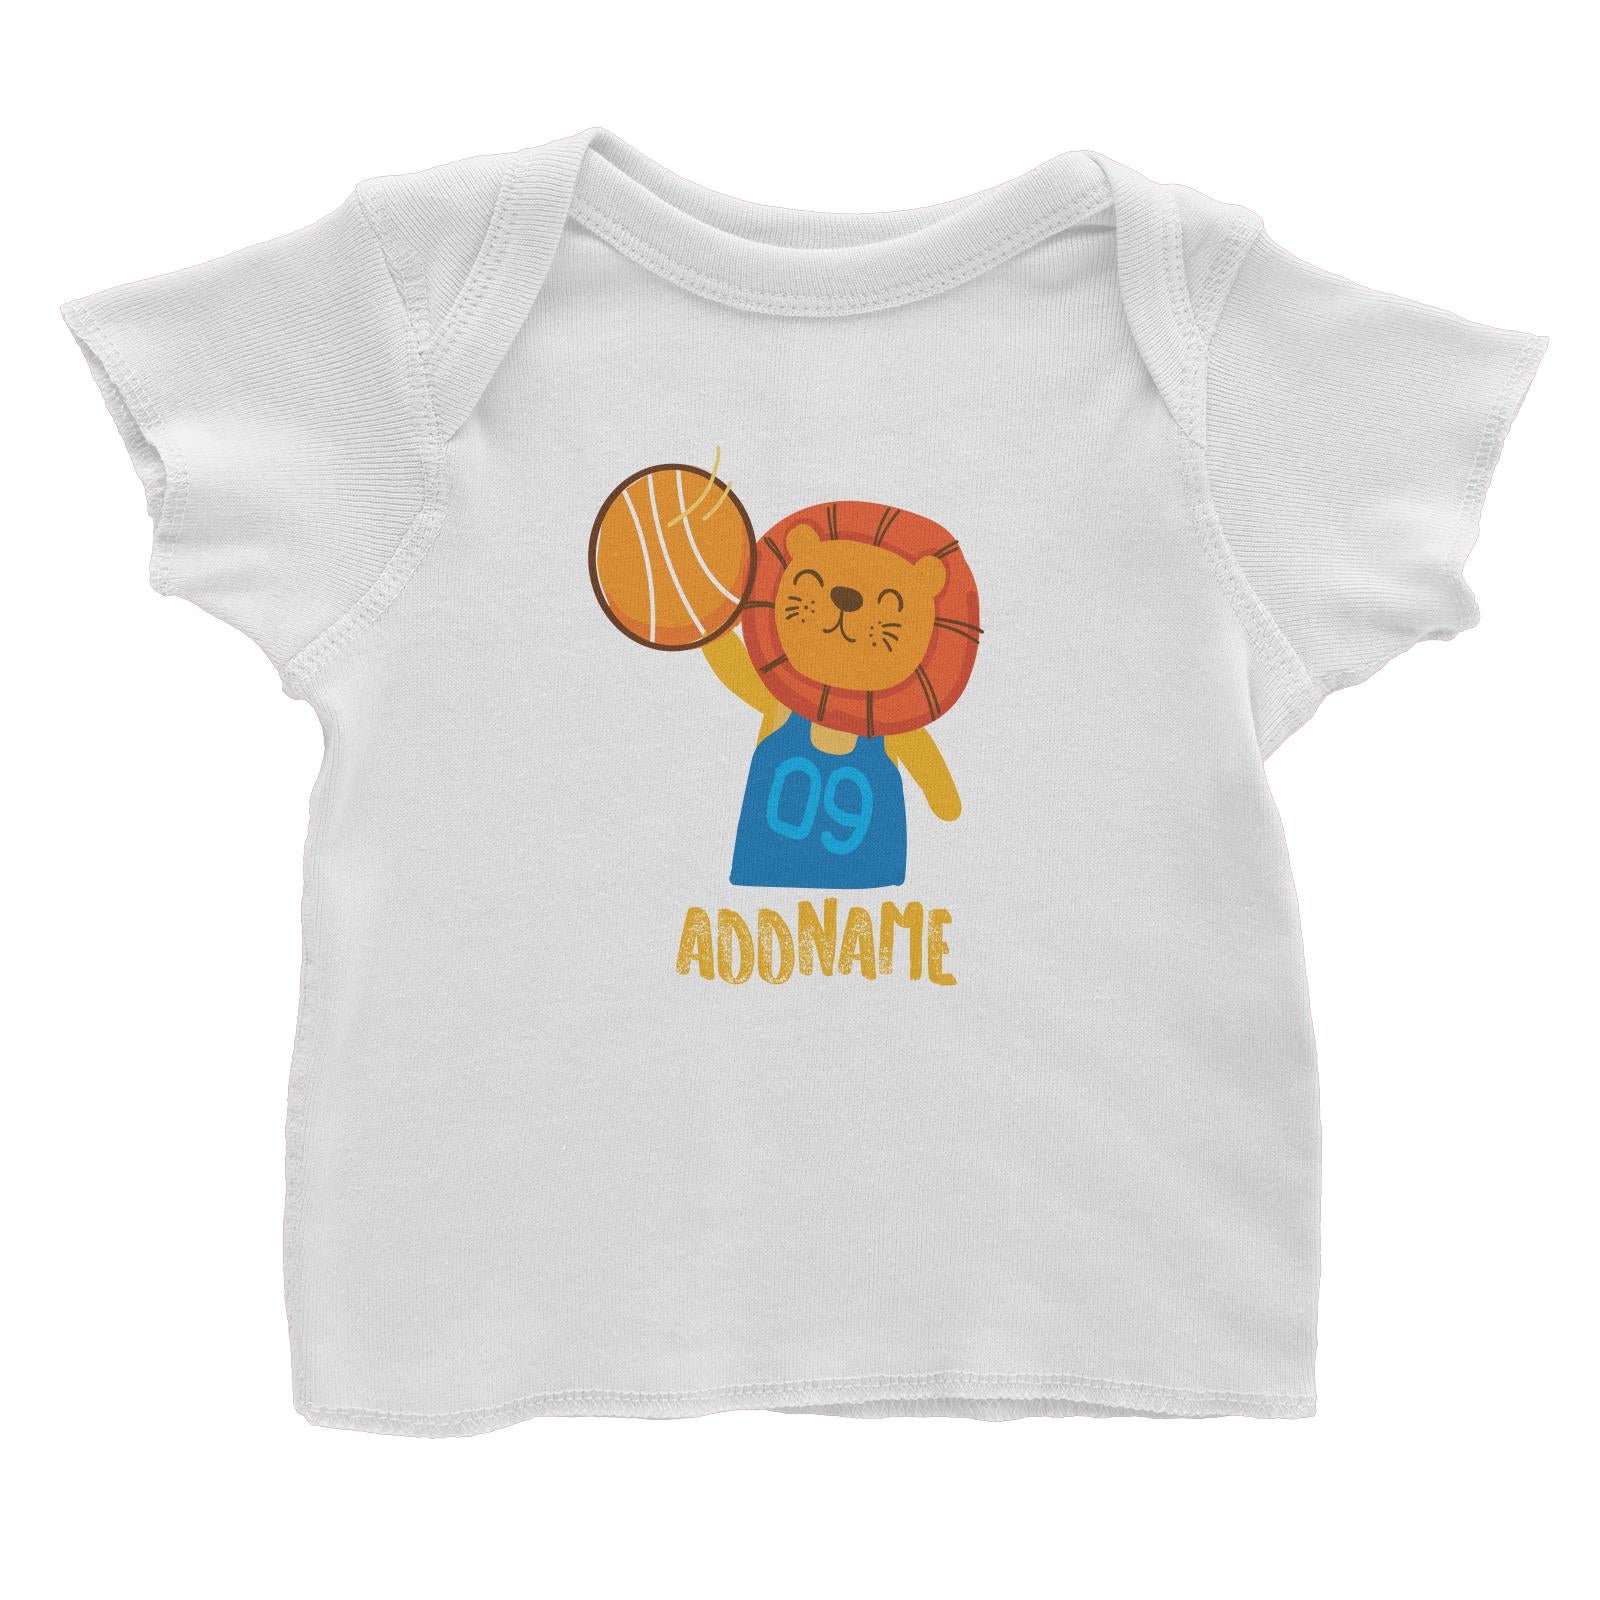 Cool Cute Animals Lion Basketball Player Addname Baby T-Shirt